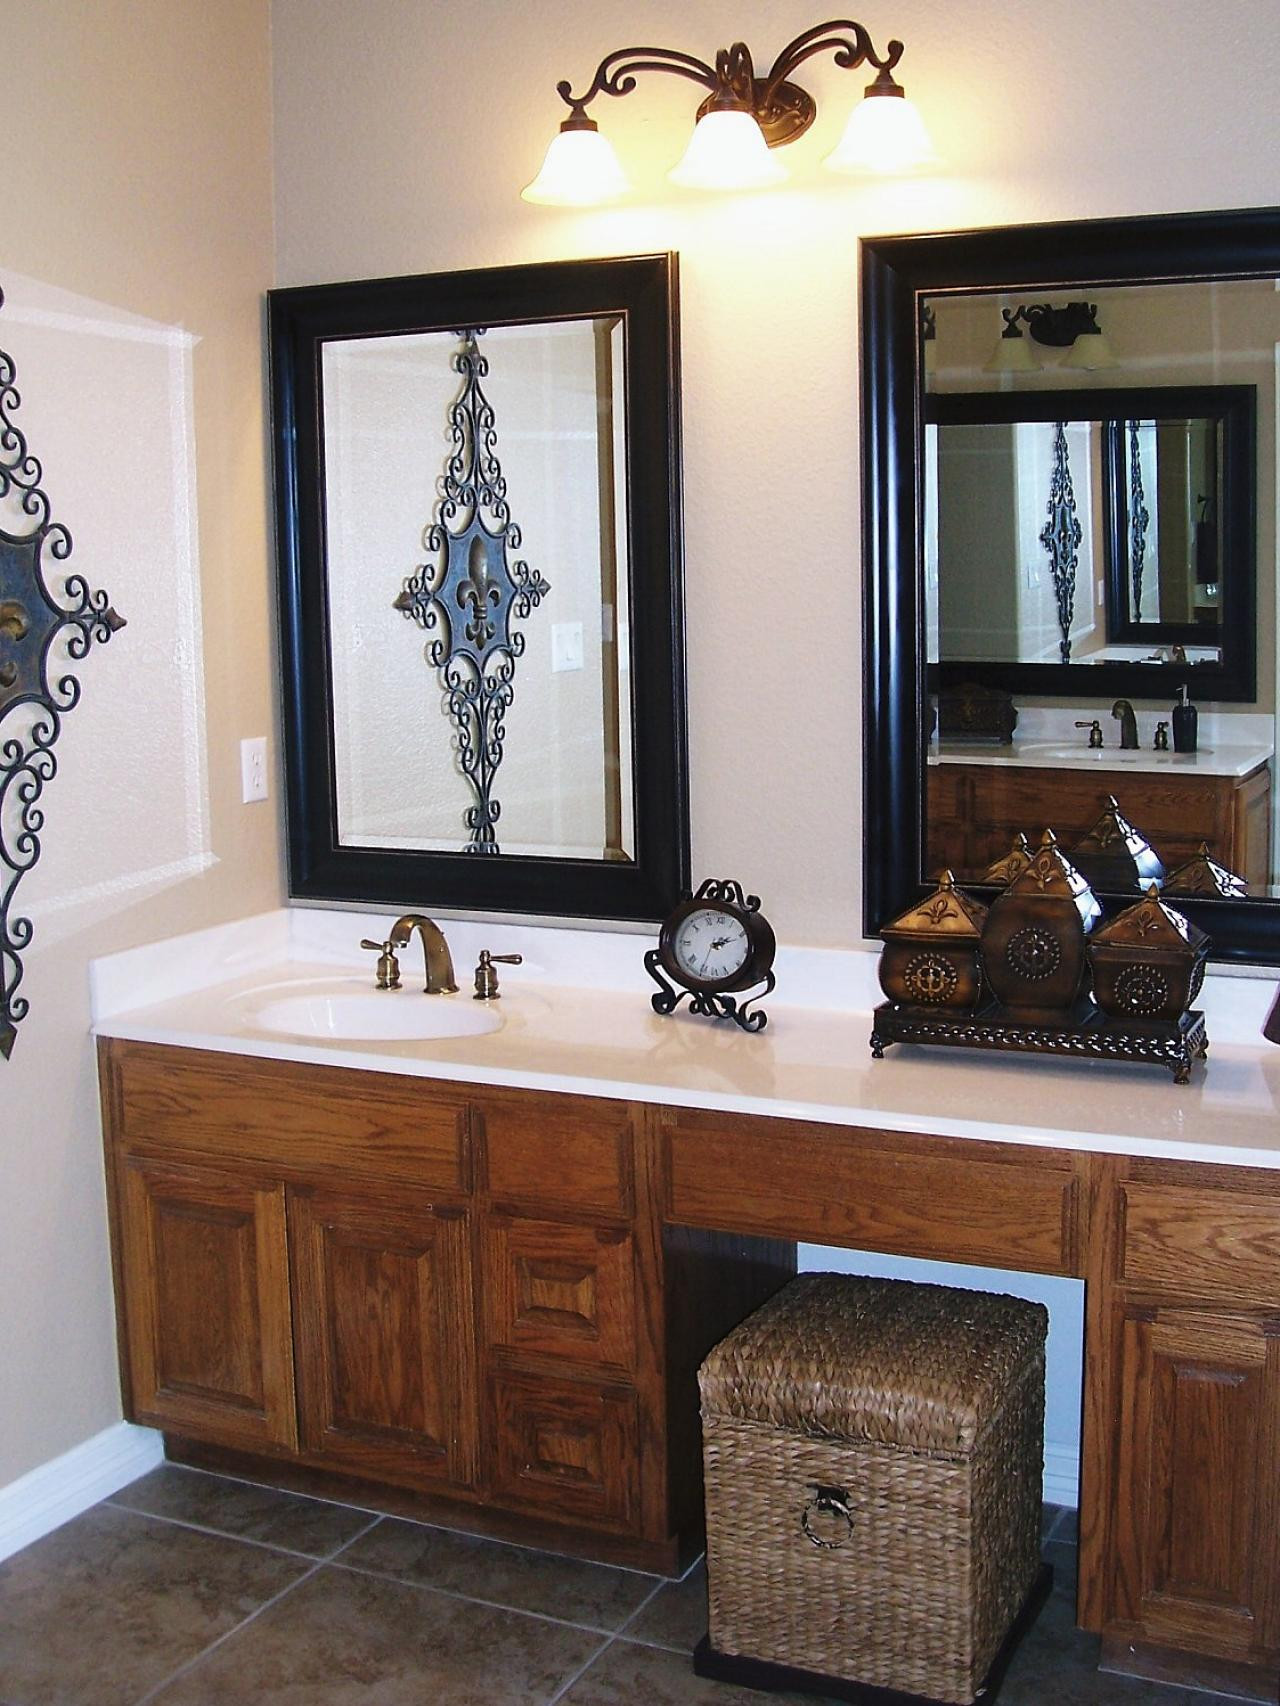 Mirrors Over Bathroom Sinks
 Bathroom Vanity Mirrors for Aesthetics and Functions